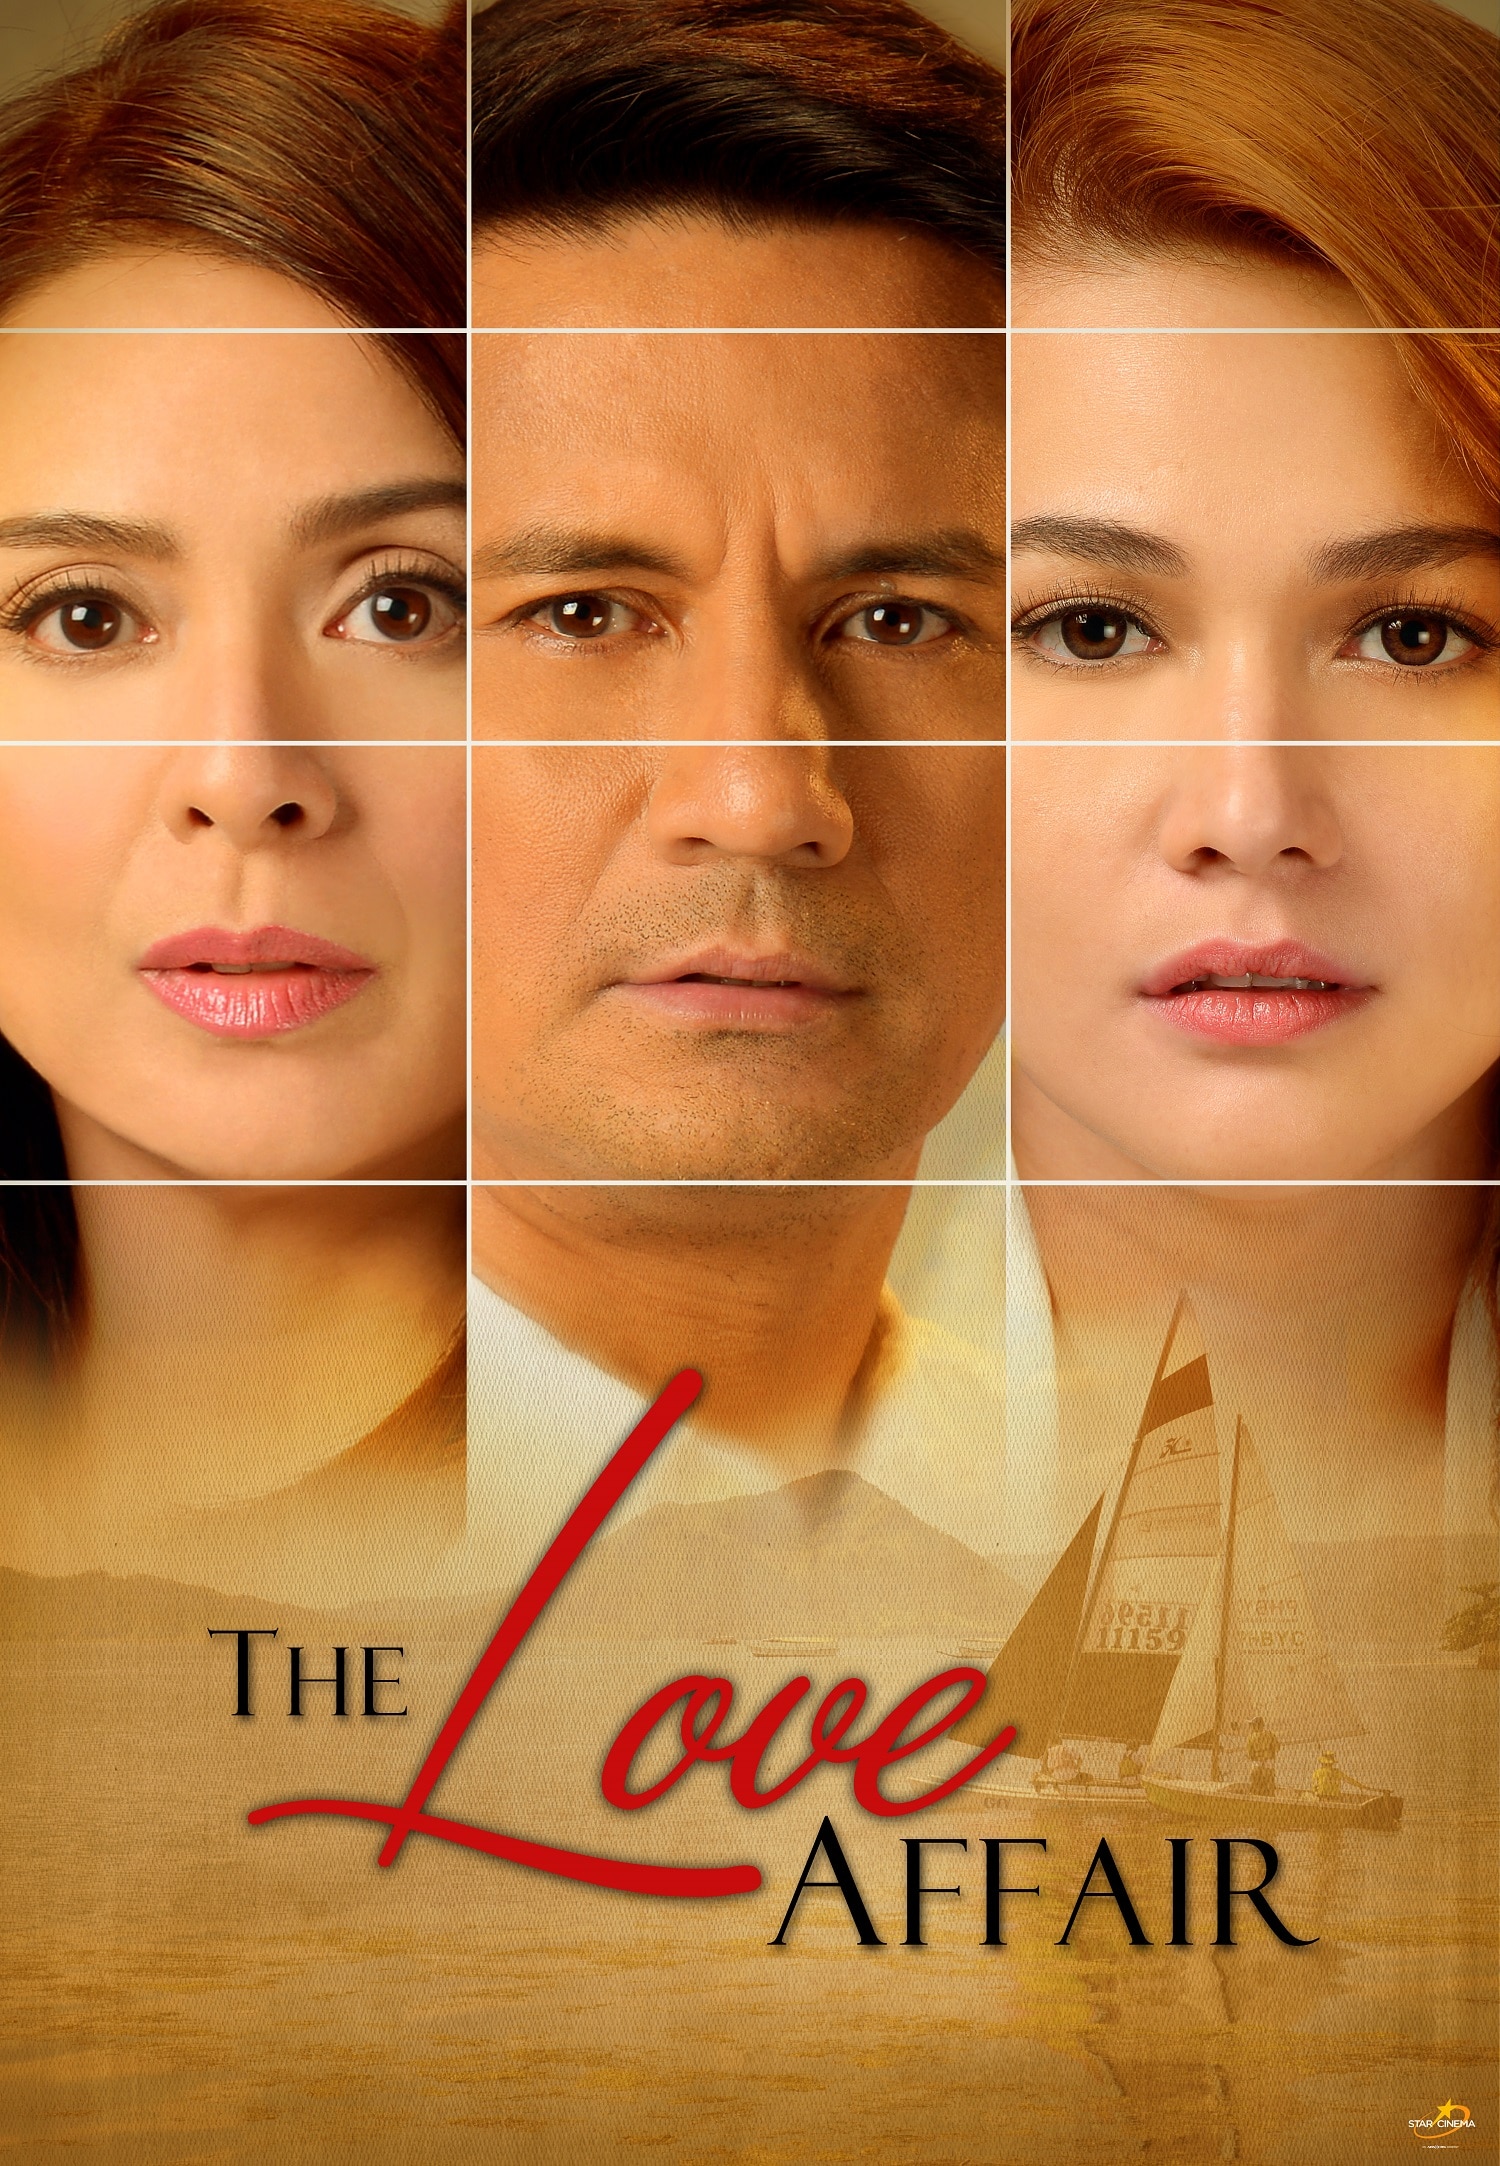 https://data-corporate.abs-cbn.com/corp/medialibrary/dotcom/isd_cast/298x442/the-love-affair-(without-credits).jpg?ext=.jpg